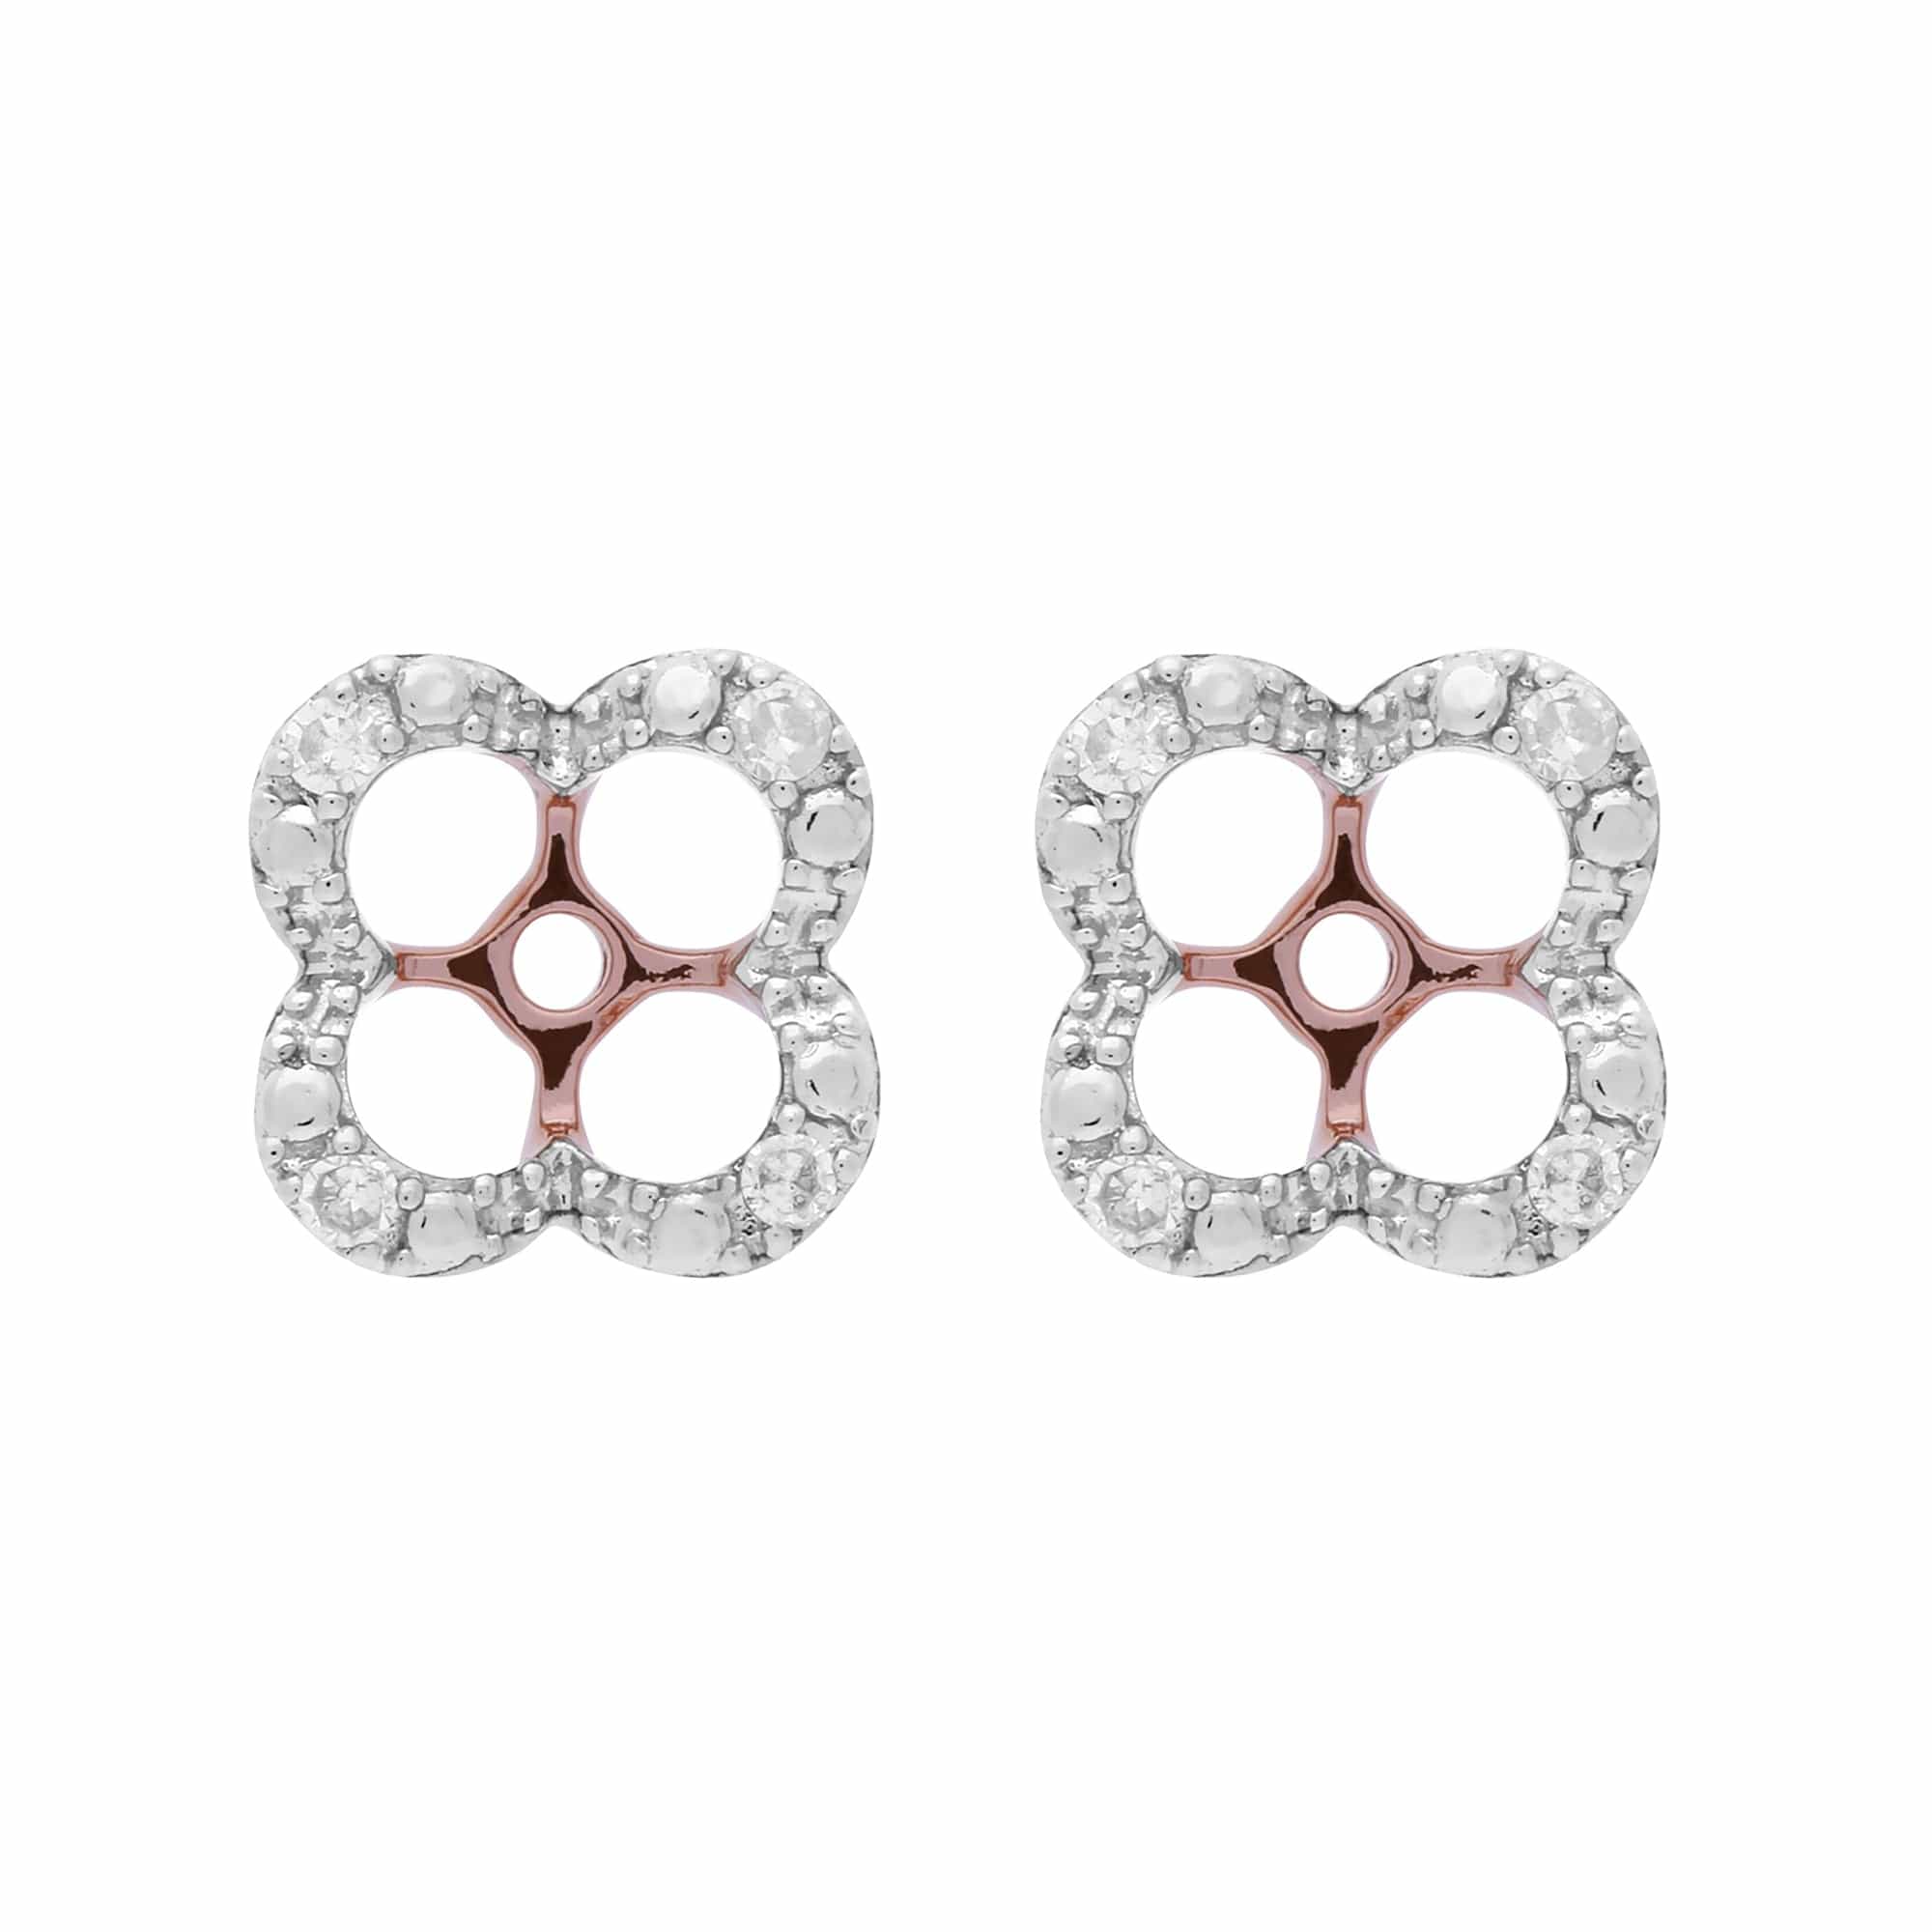 Classic Round Pink Opal Stud Earrings with Detachable Diamond Flower Jacket in 9ct Rose Gold - Gemondo